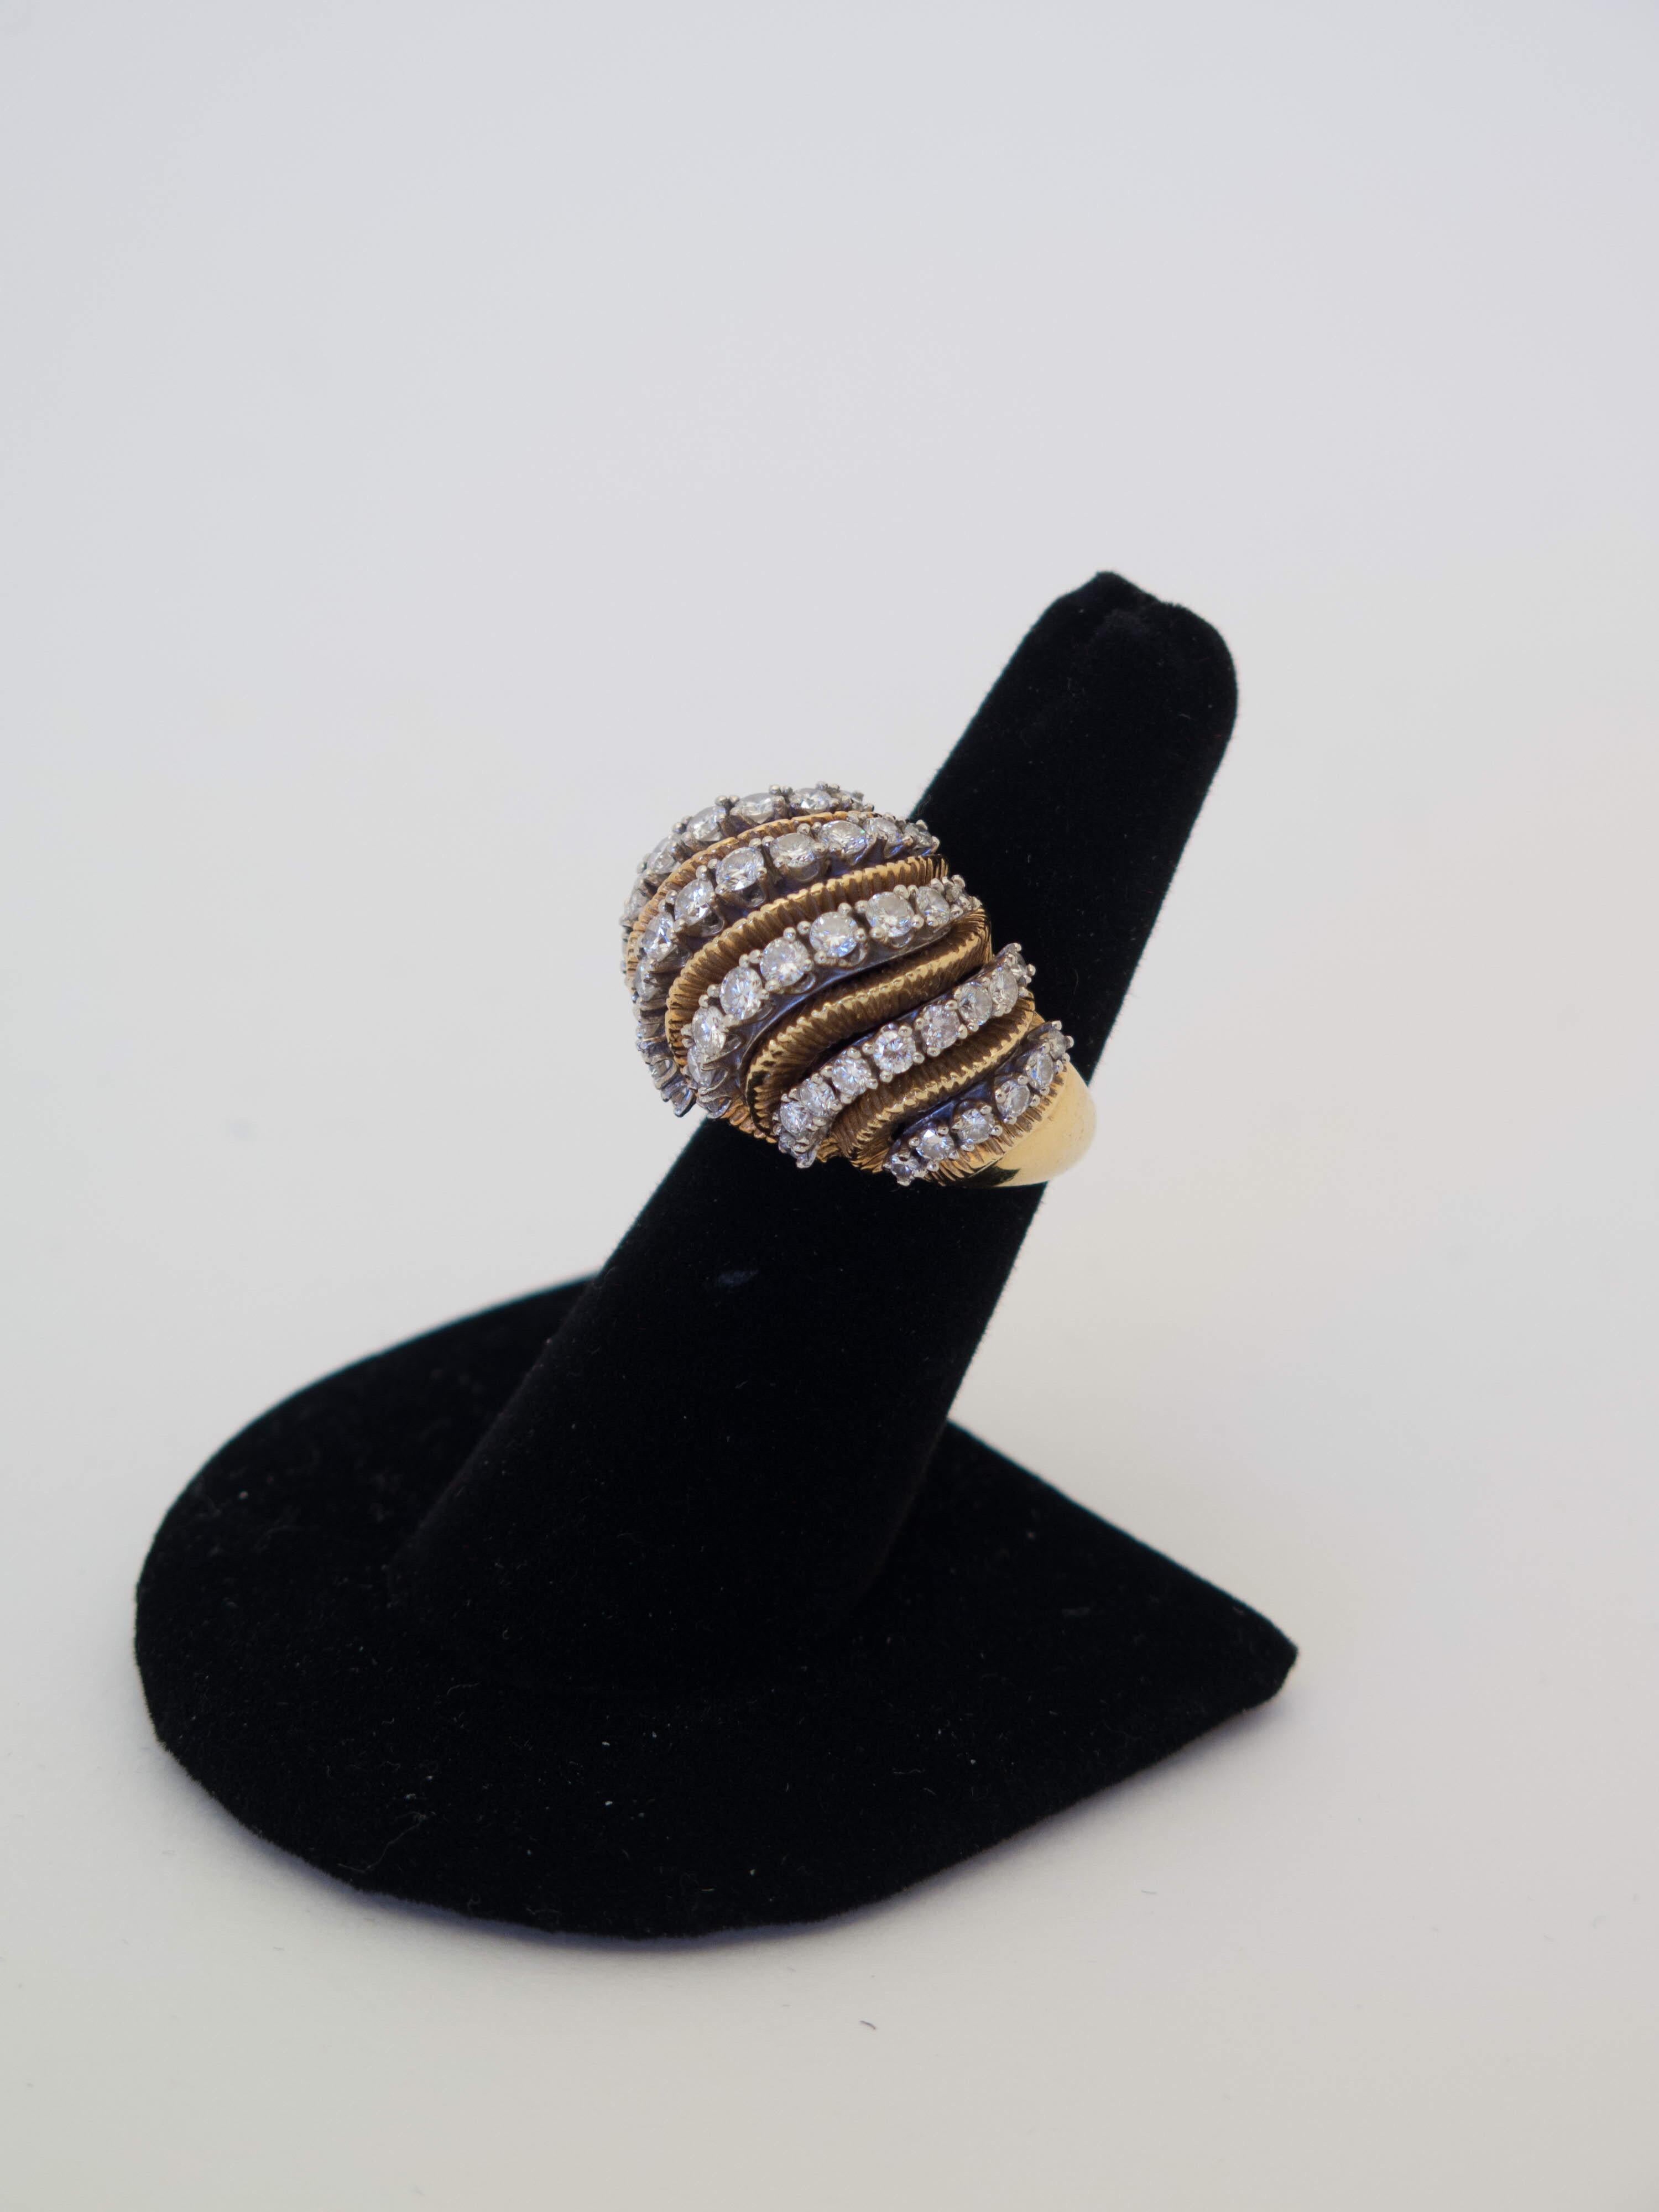 Circa 1960's organic-form bombe diamond, 18K yellow gold ring. There are 59 round brilliant-cut diamonds set in white gold. Total weight of diamonds approximate 2.85 carats, G-H color, Vs-Sl clarity. Stamped 18K